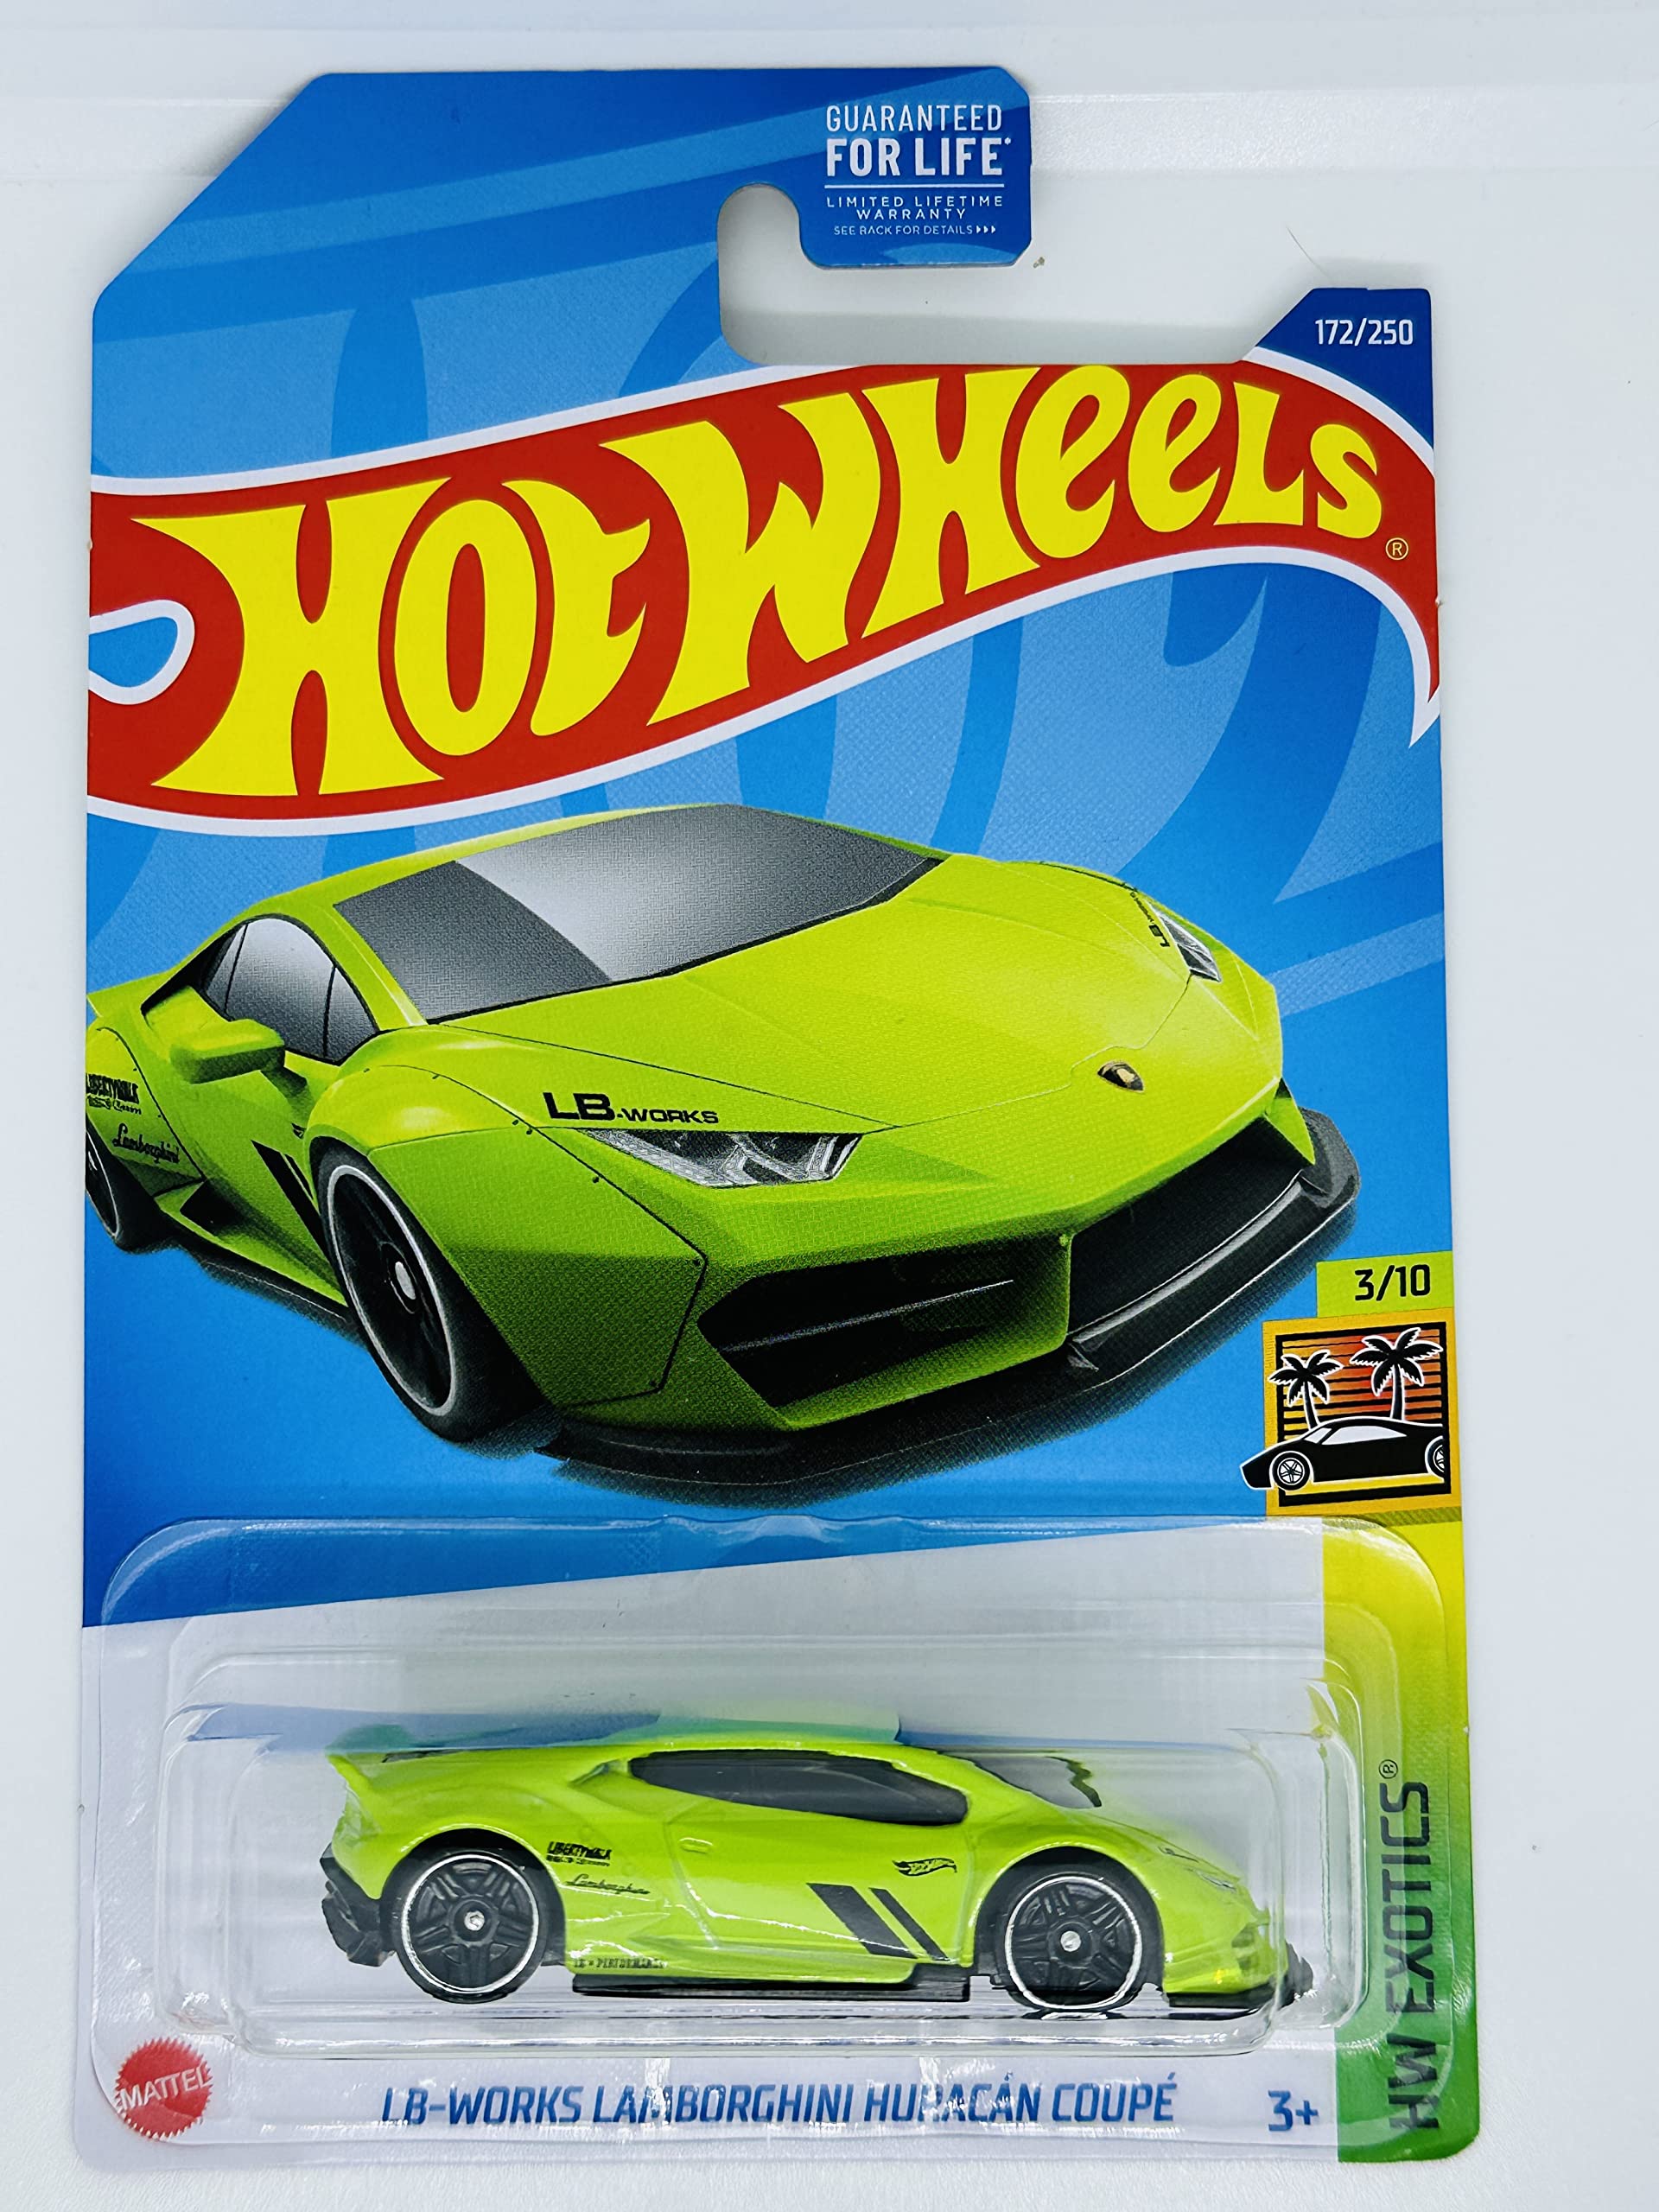 Hot Wheels - LB-Works Lamborghini Huracan Coupe - Kroger Exclusive Green - HW Exotics 3/10 - 172/250 Ships Bubble Wrapped in a Box